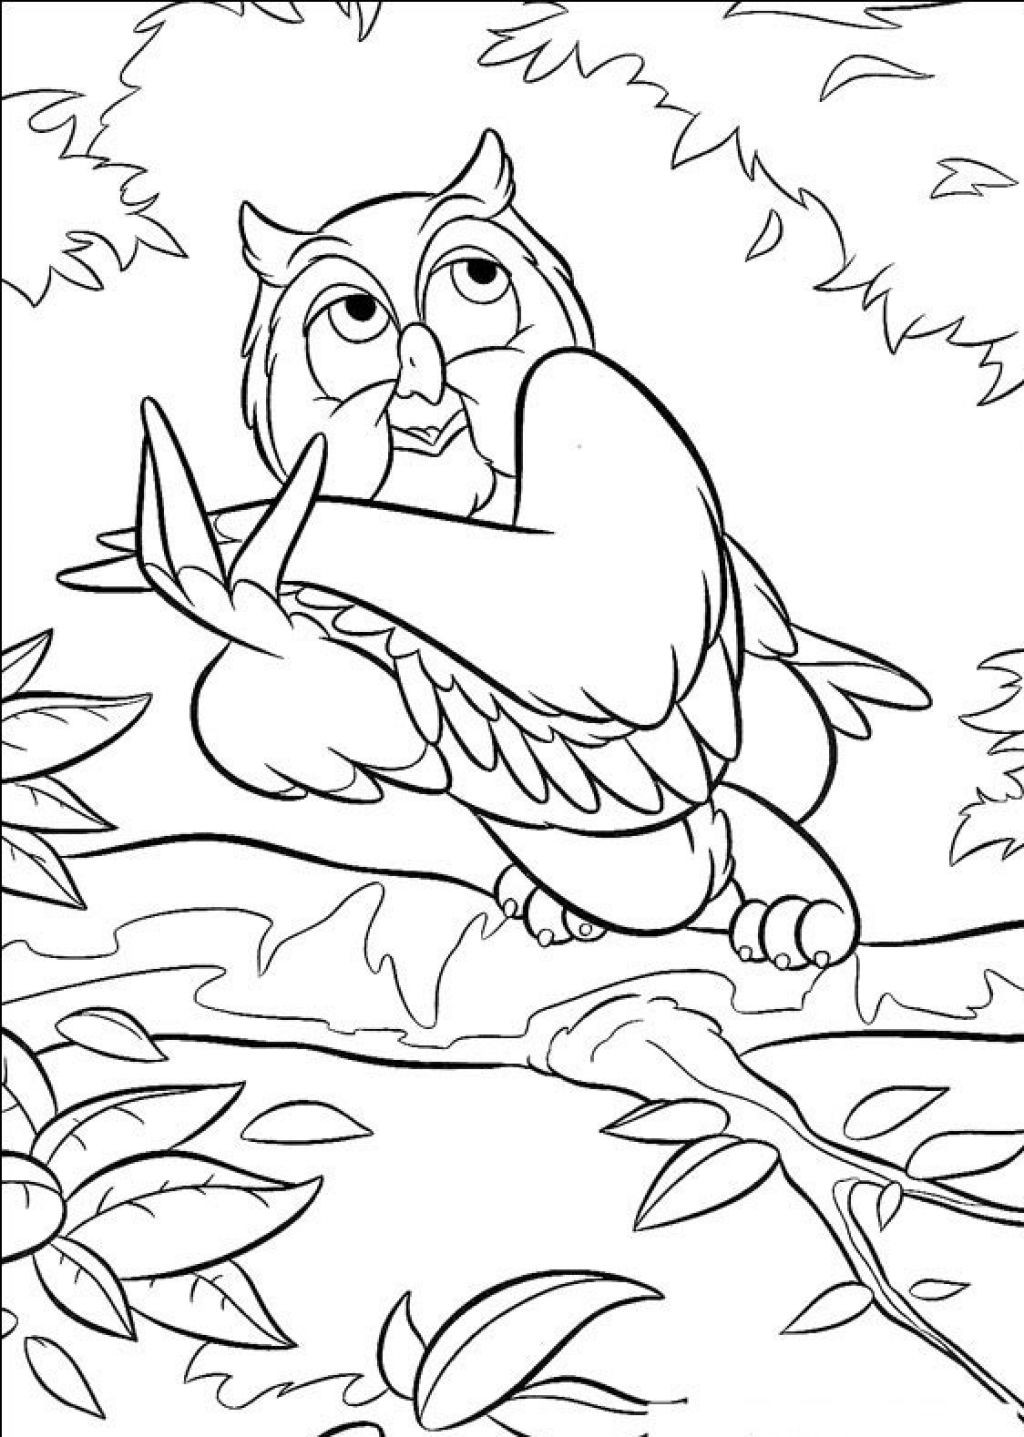 Printable Owl Coloring Pages
 Free Printable Owl Coloring Pages For Kids